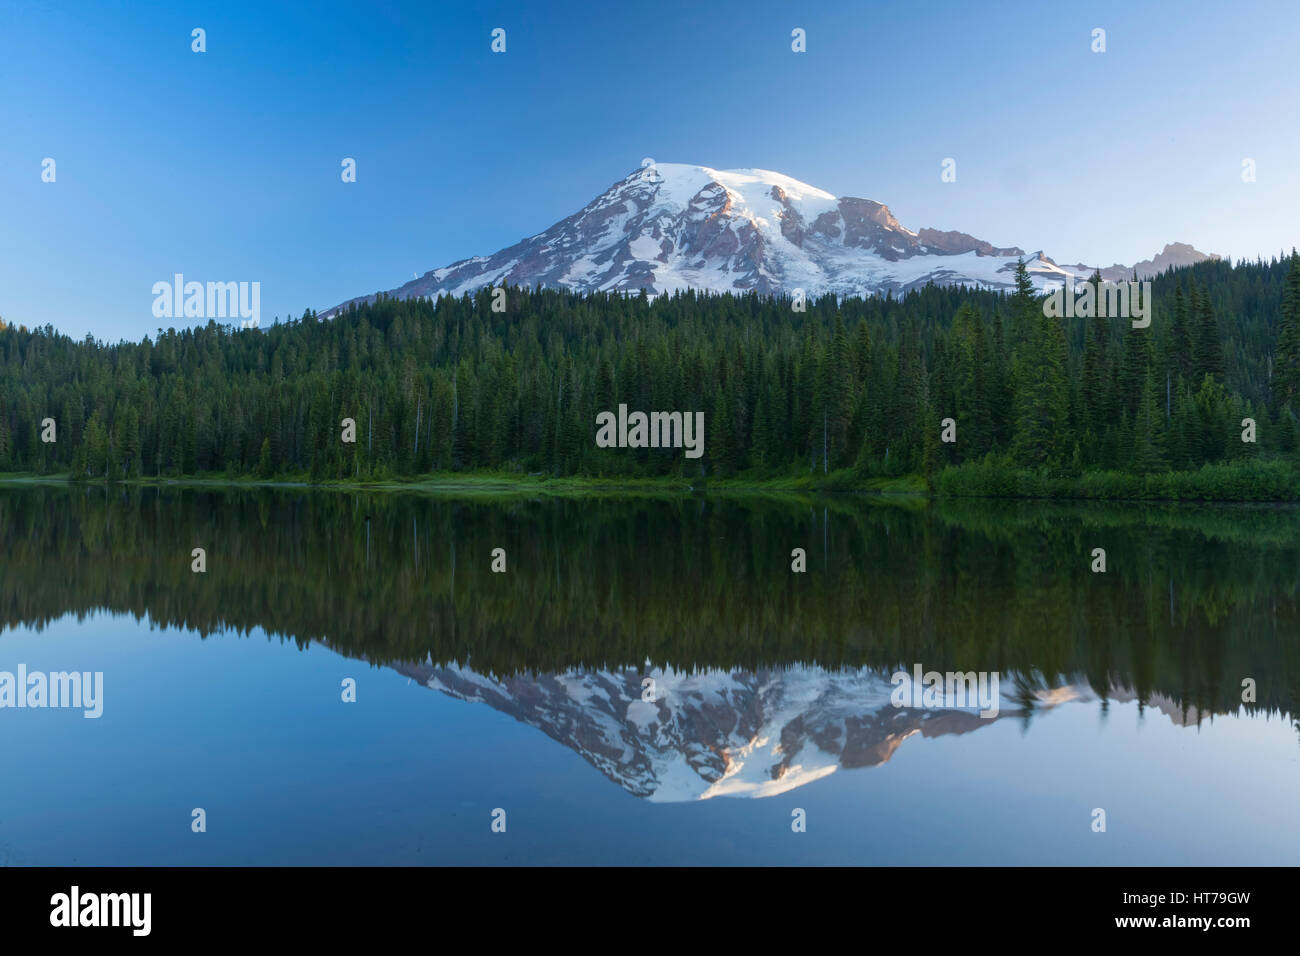 Mt Rainier (elev 14,410) at sunrise with Reflection Lakes in the foreground, Mount Rainier National Park, WA, USA Stock Photo